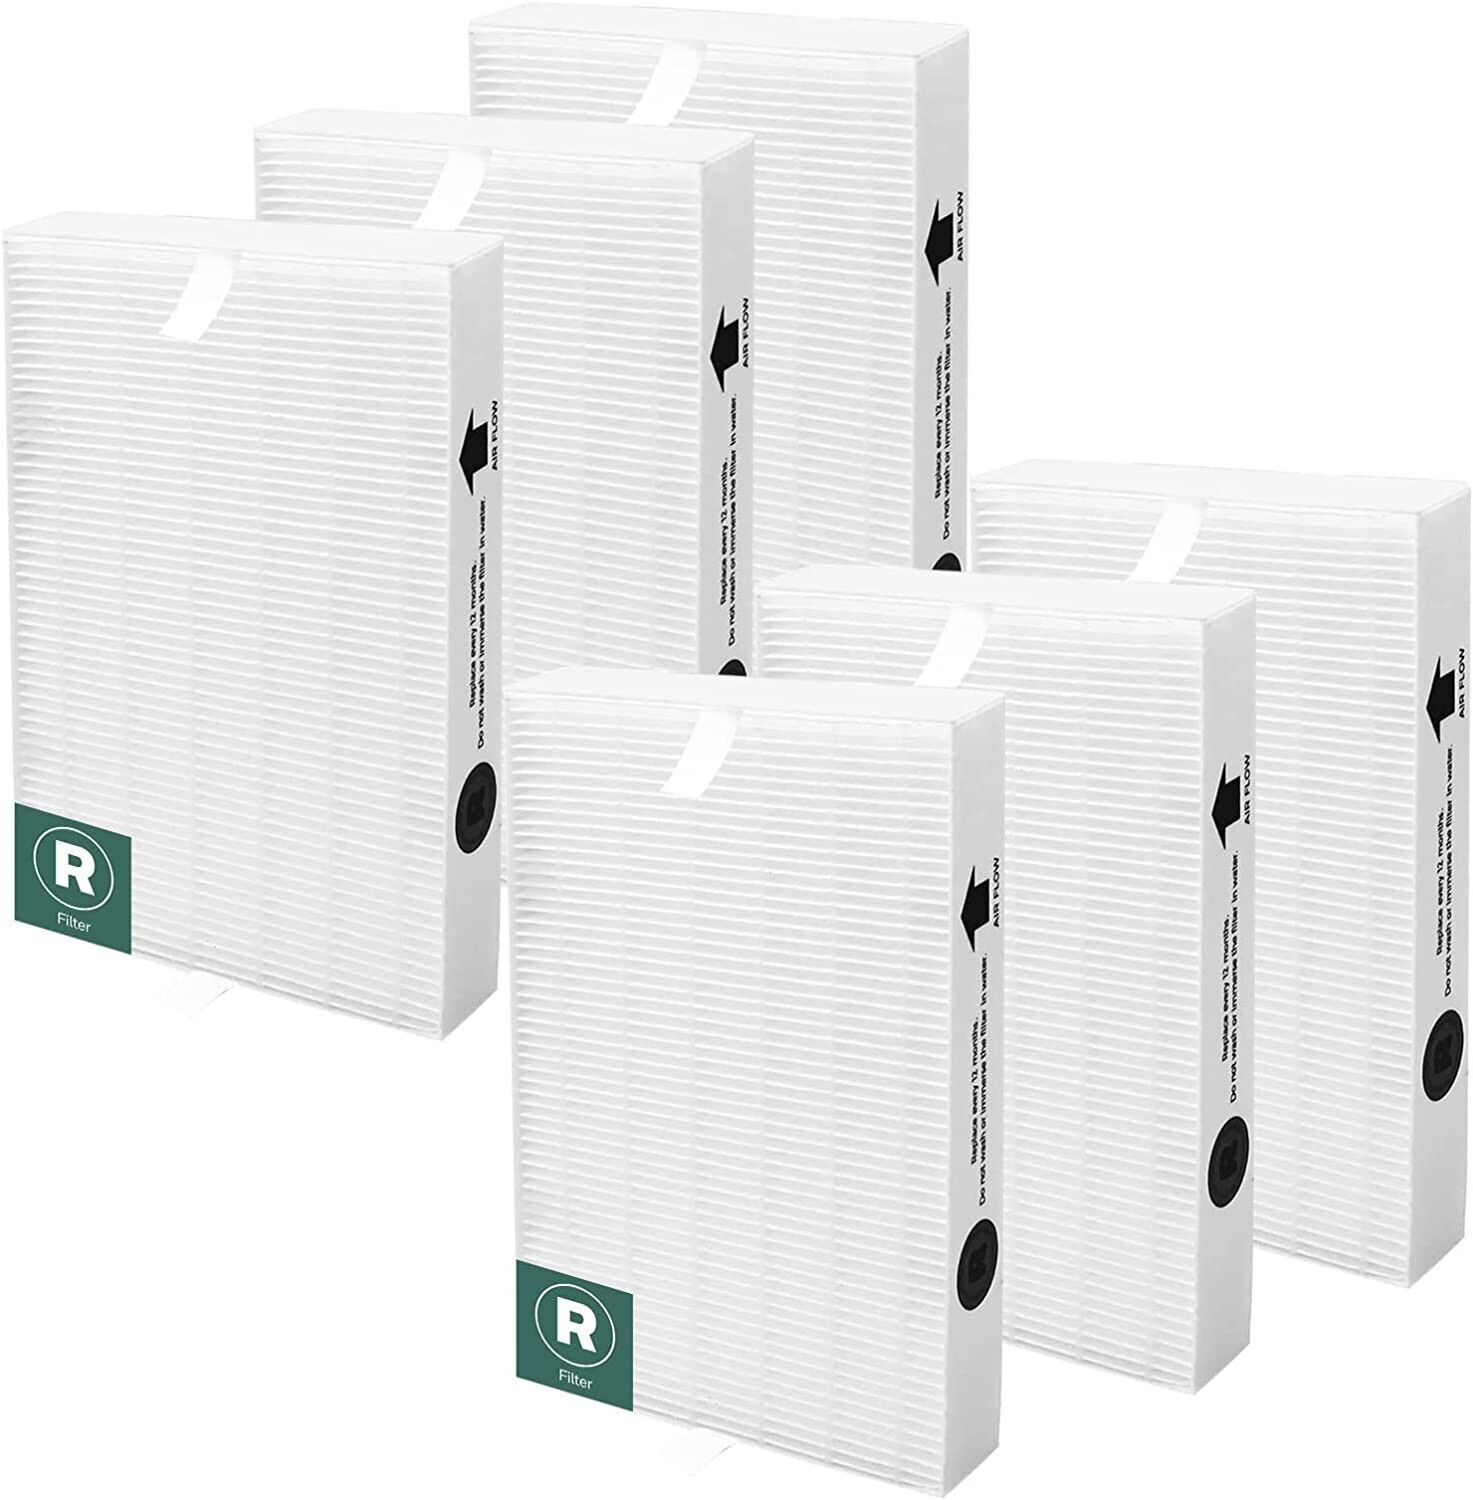 HPA300 HEPA Replacement Filter R for Honeywell Air Purifier 6Pack